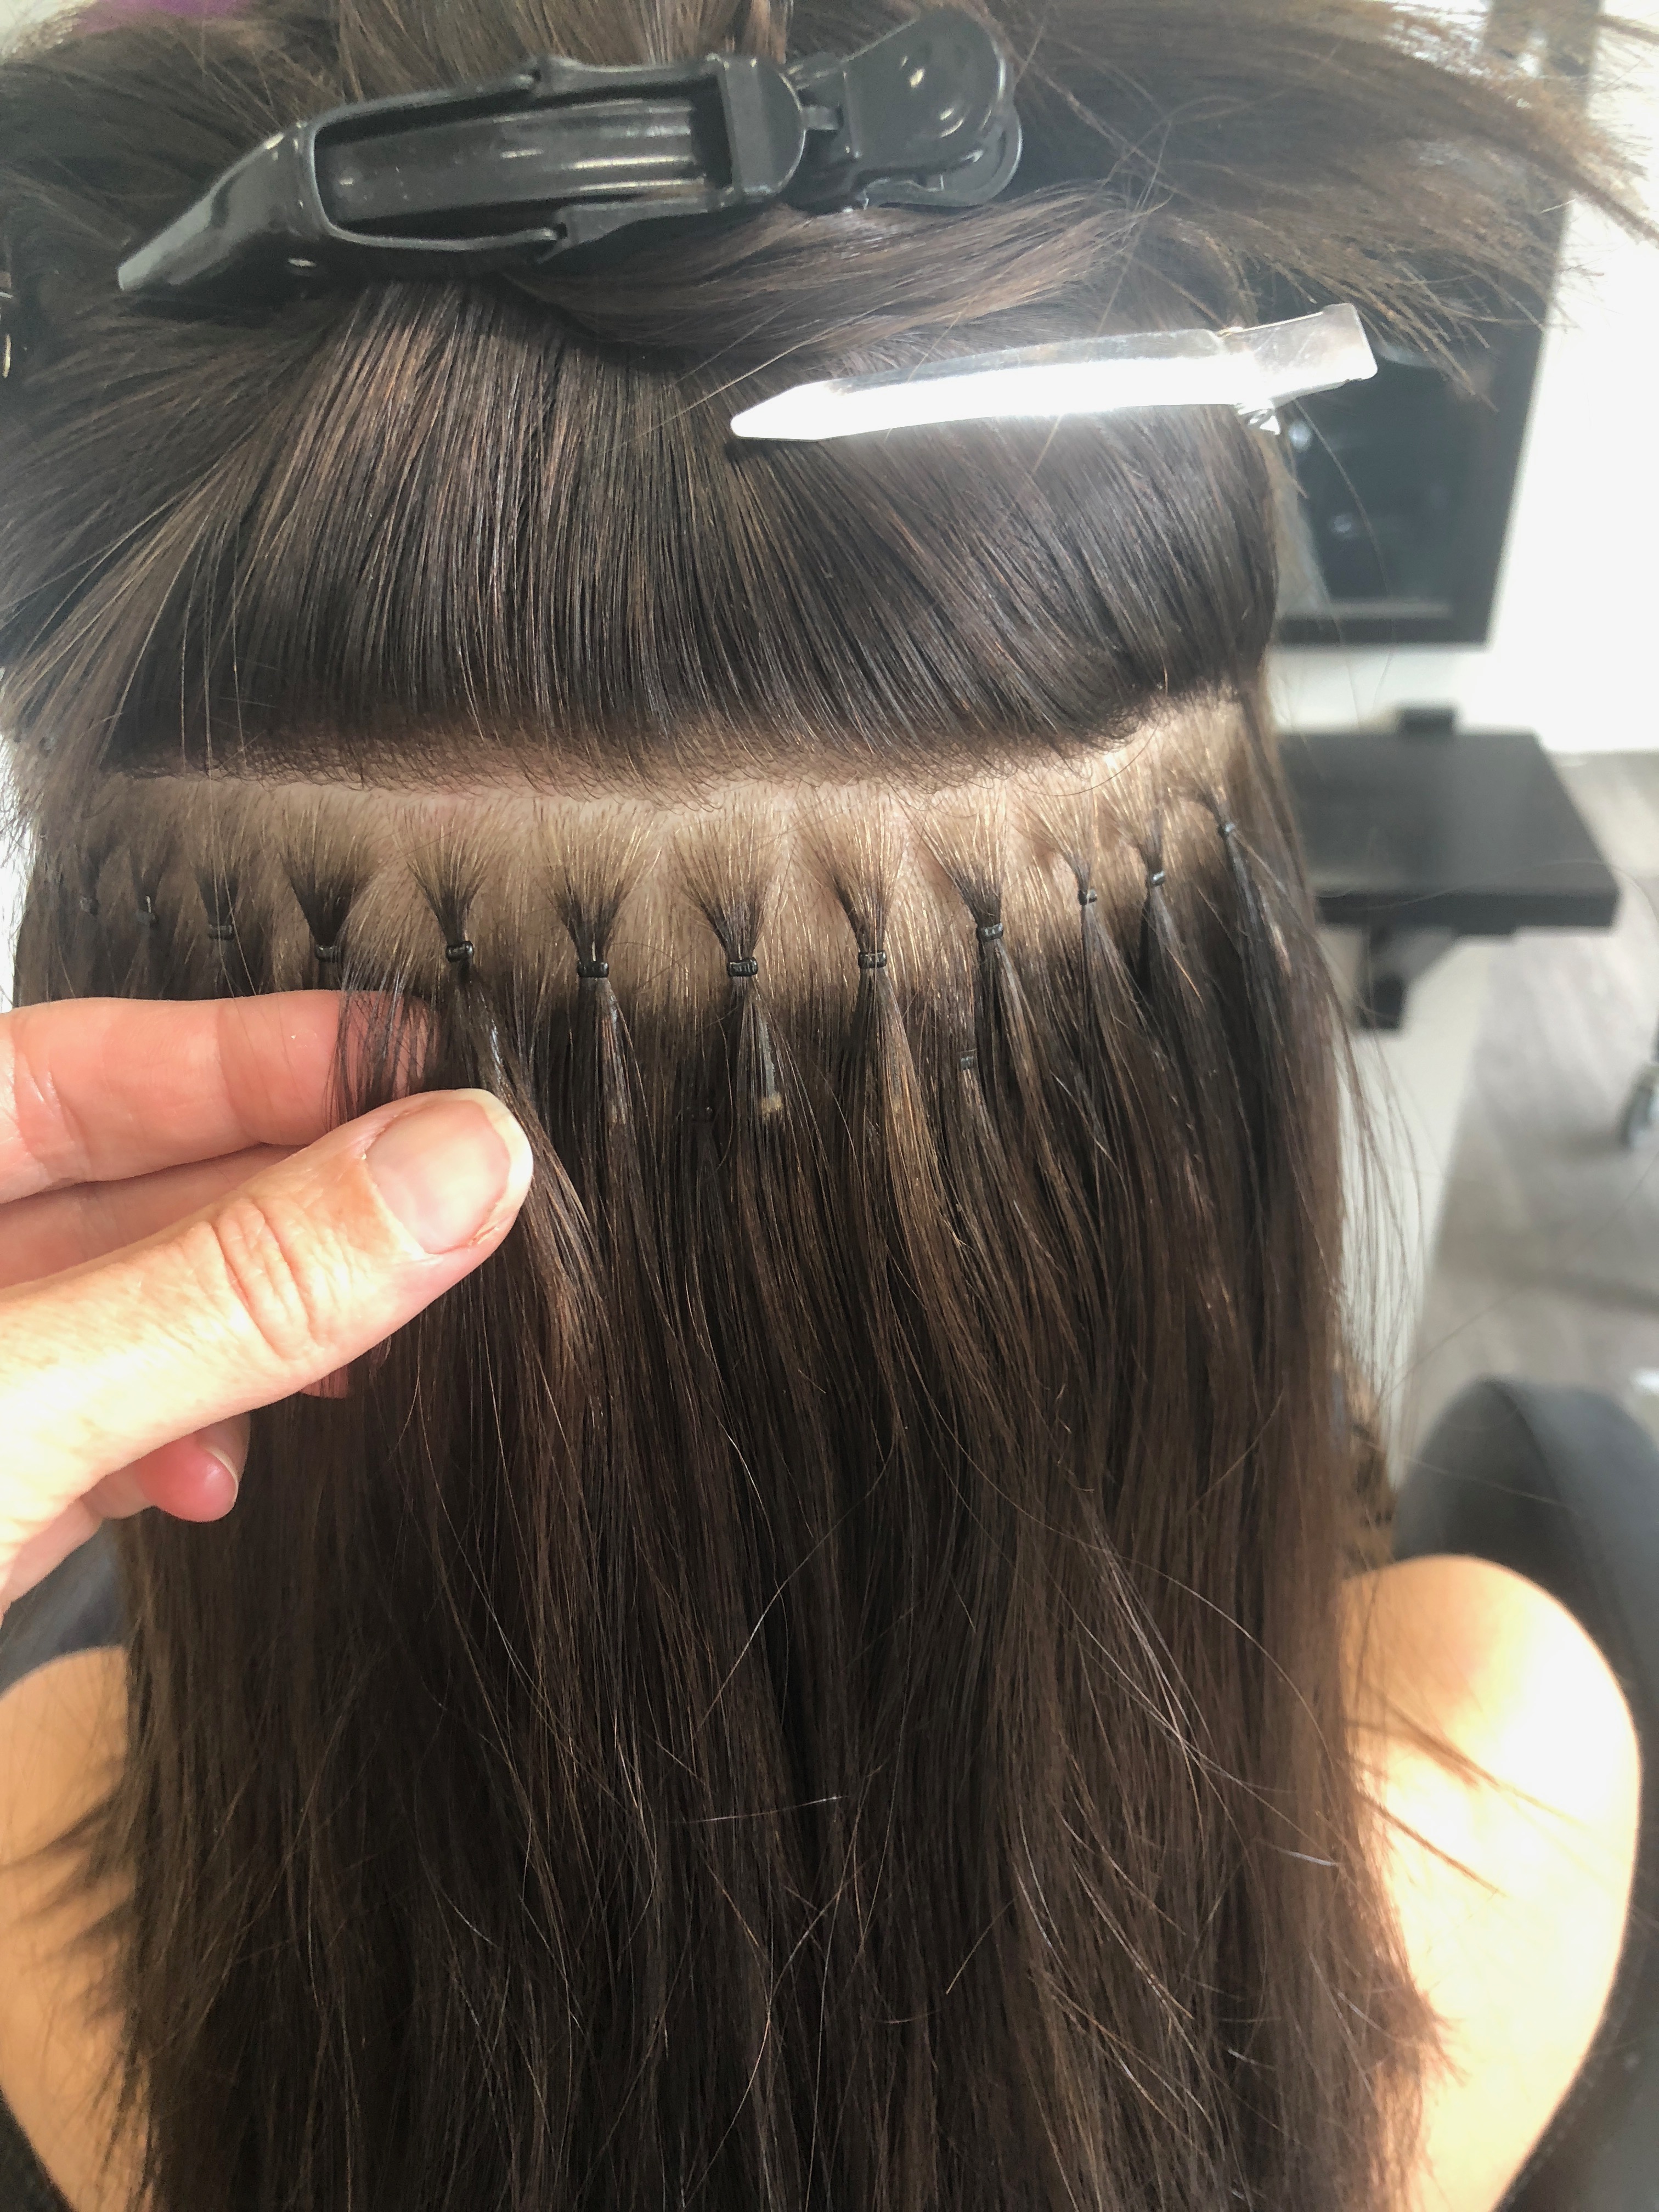 Electrificeren astronomie censuur HOW OFTEN DO HAIR EXTENSIONS NEED RE-ADJUSTING? - Eve Hair Extensions